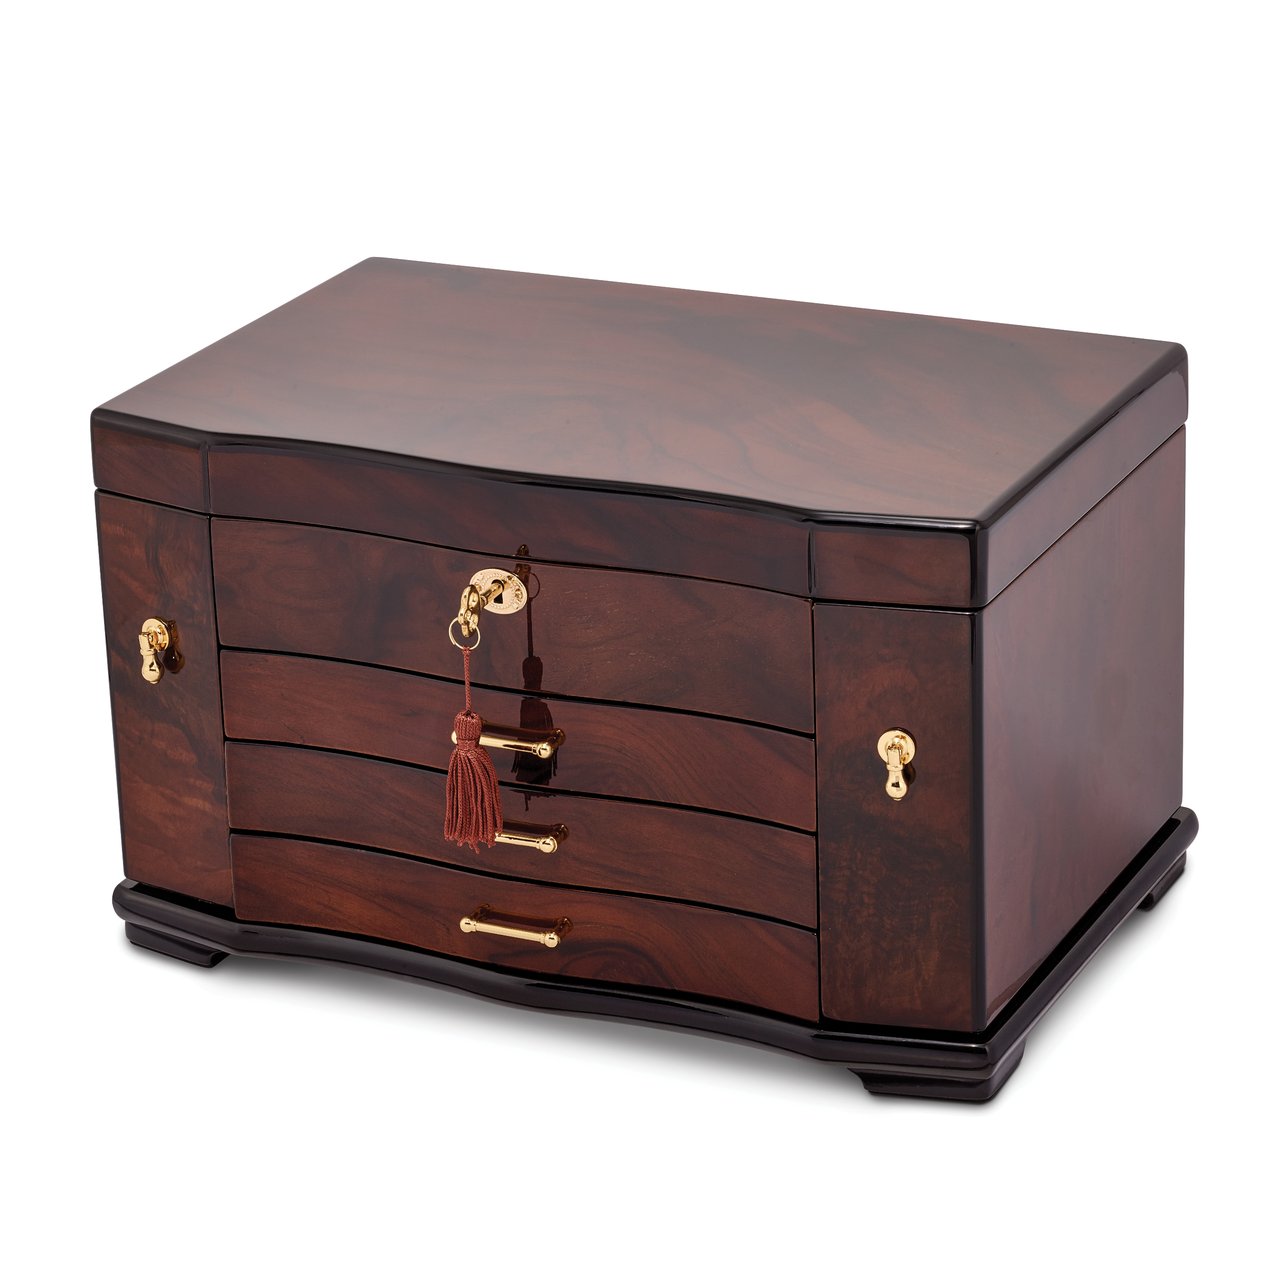 Walnut Burl Inlay 3 Drawer with Swing-out Sides Jewelry Box by Jere